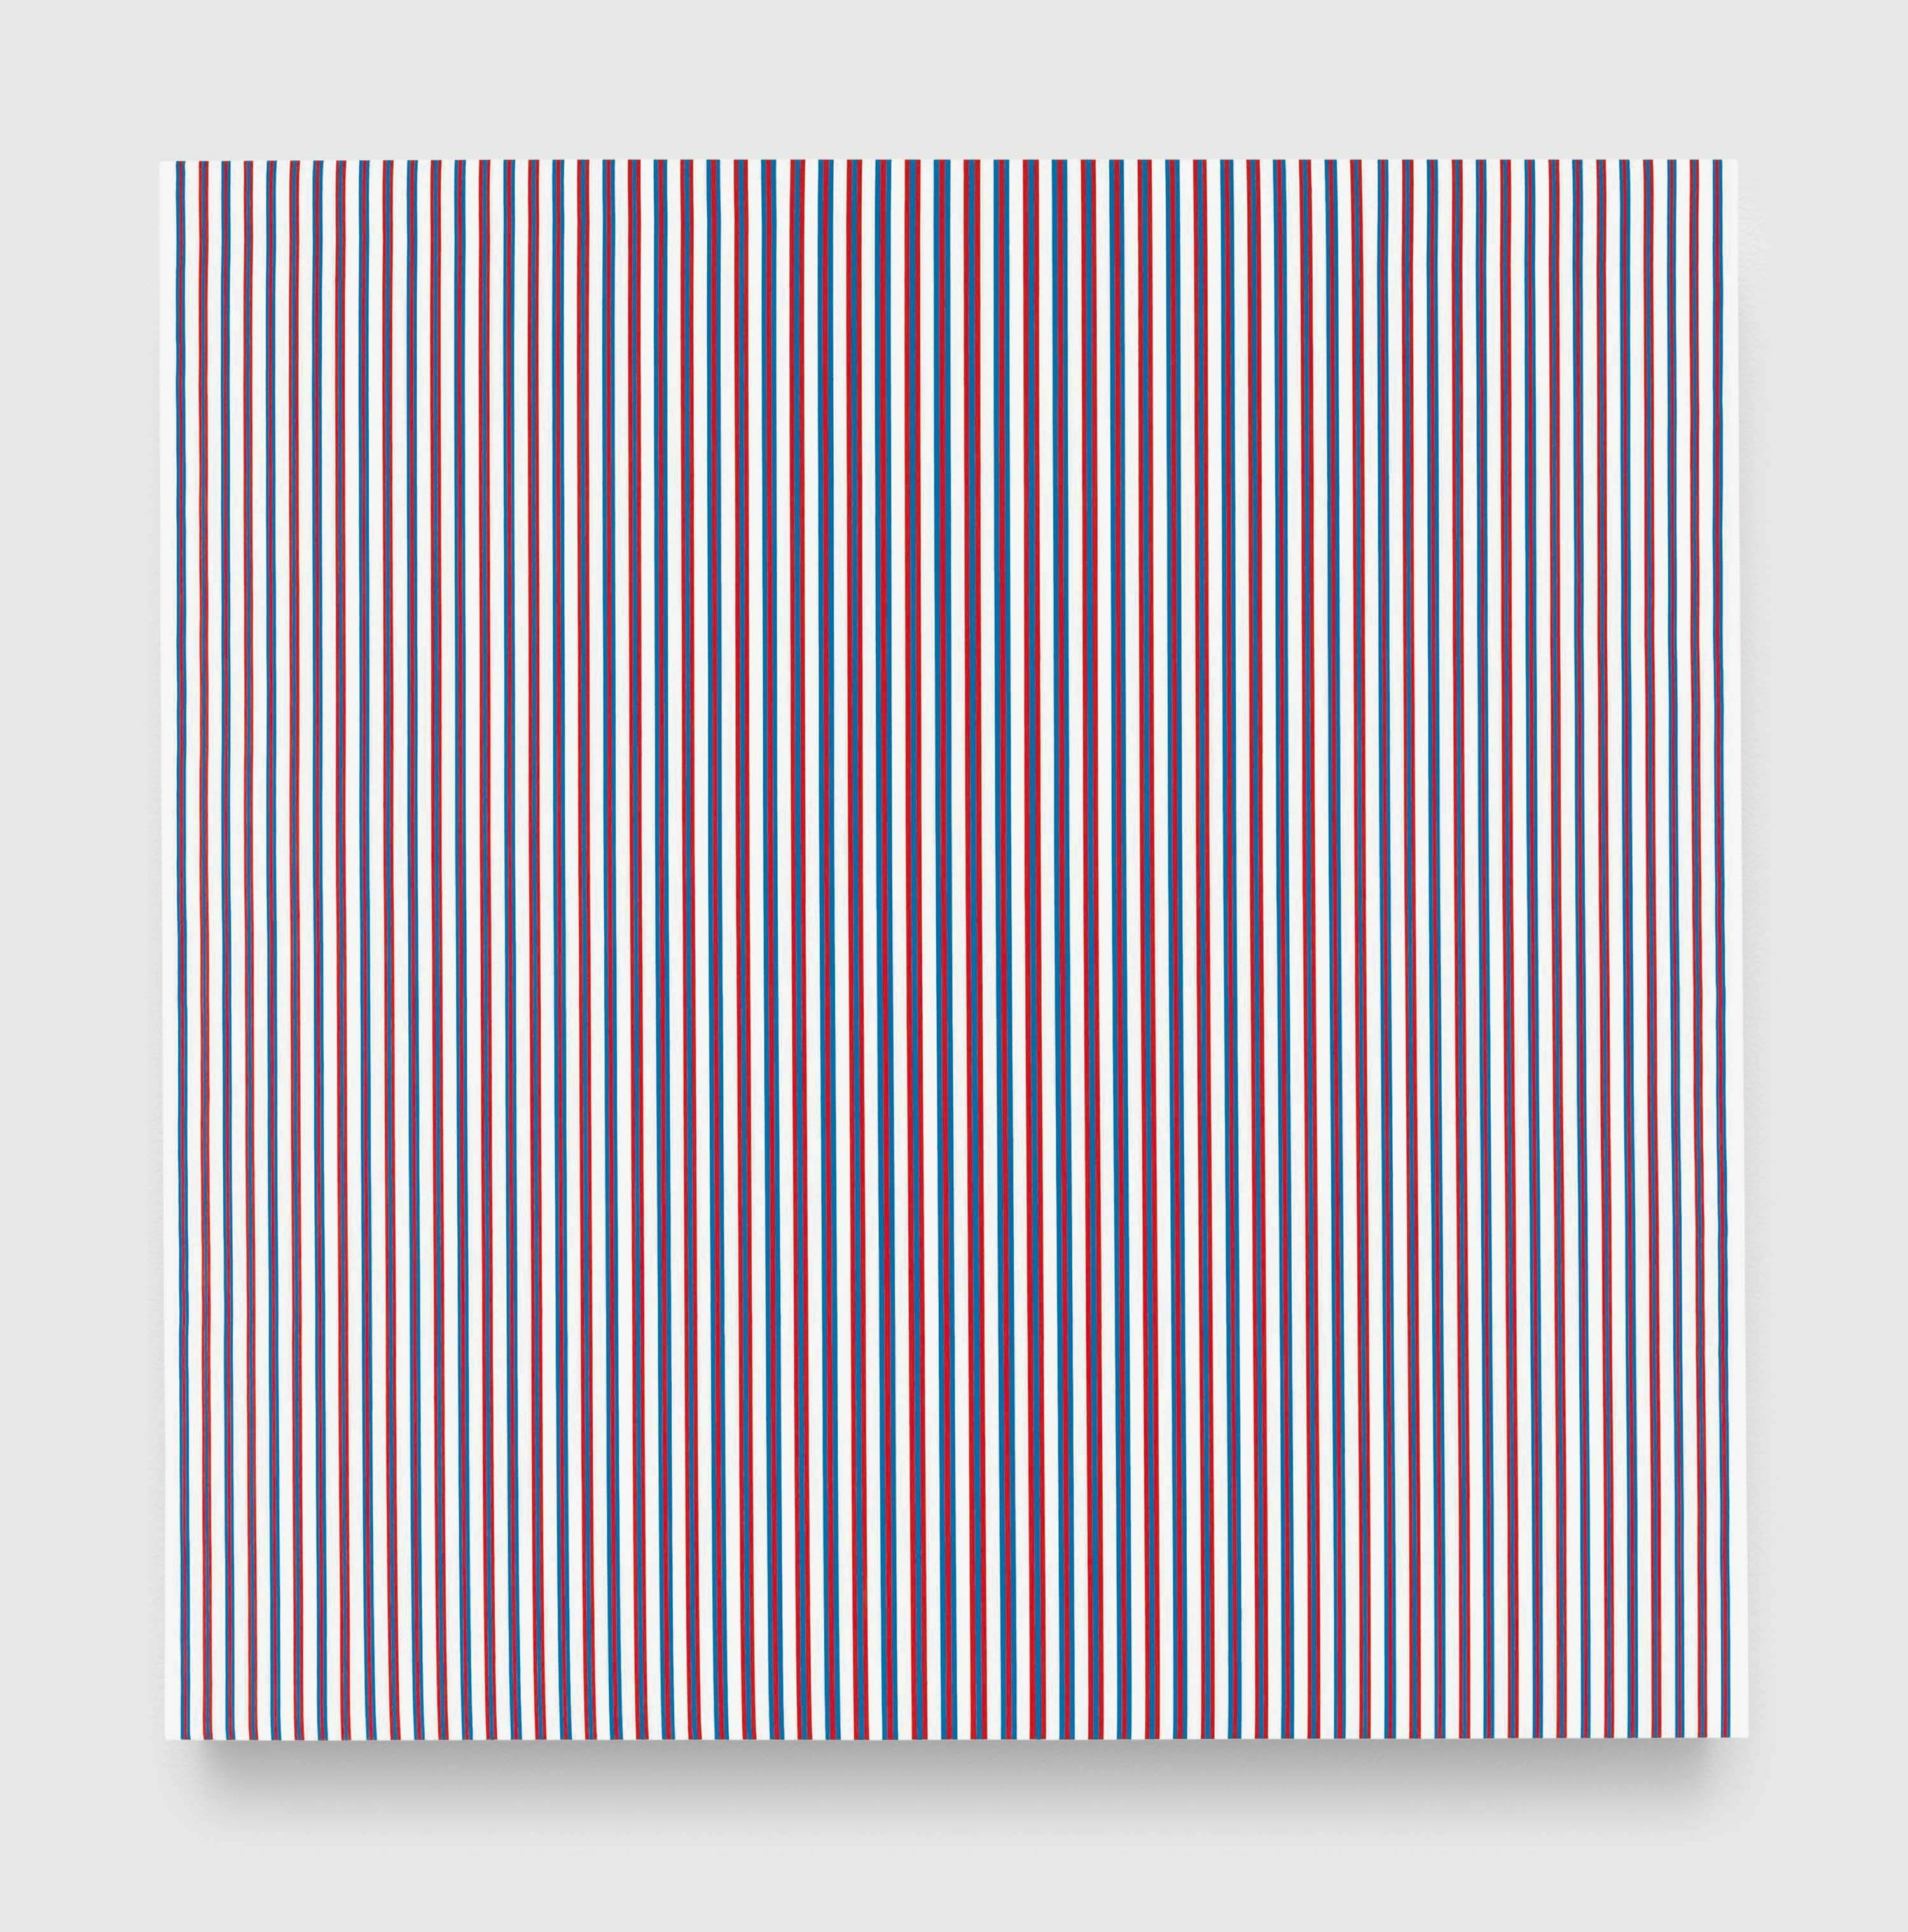 A painting by Bridget Riley, titled Chant 2, dated 1967.